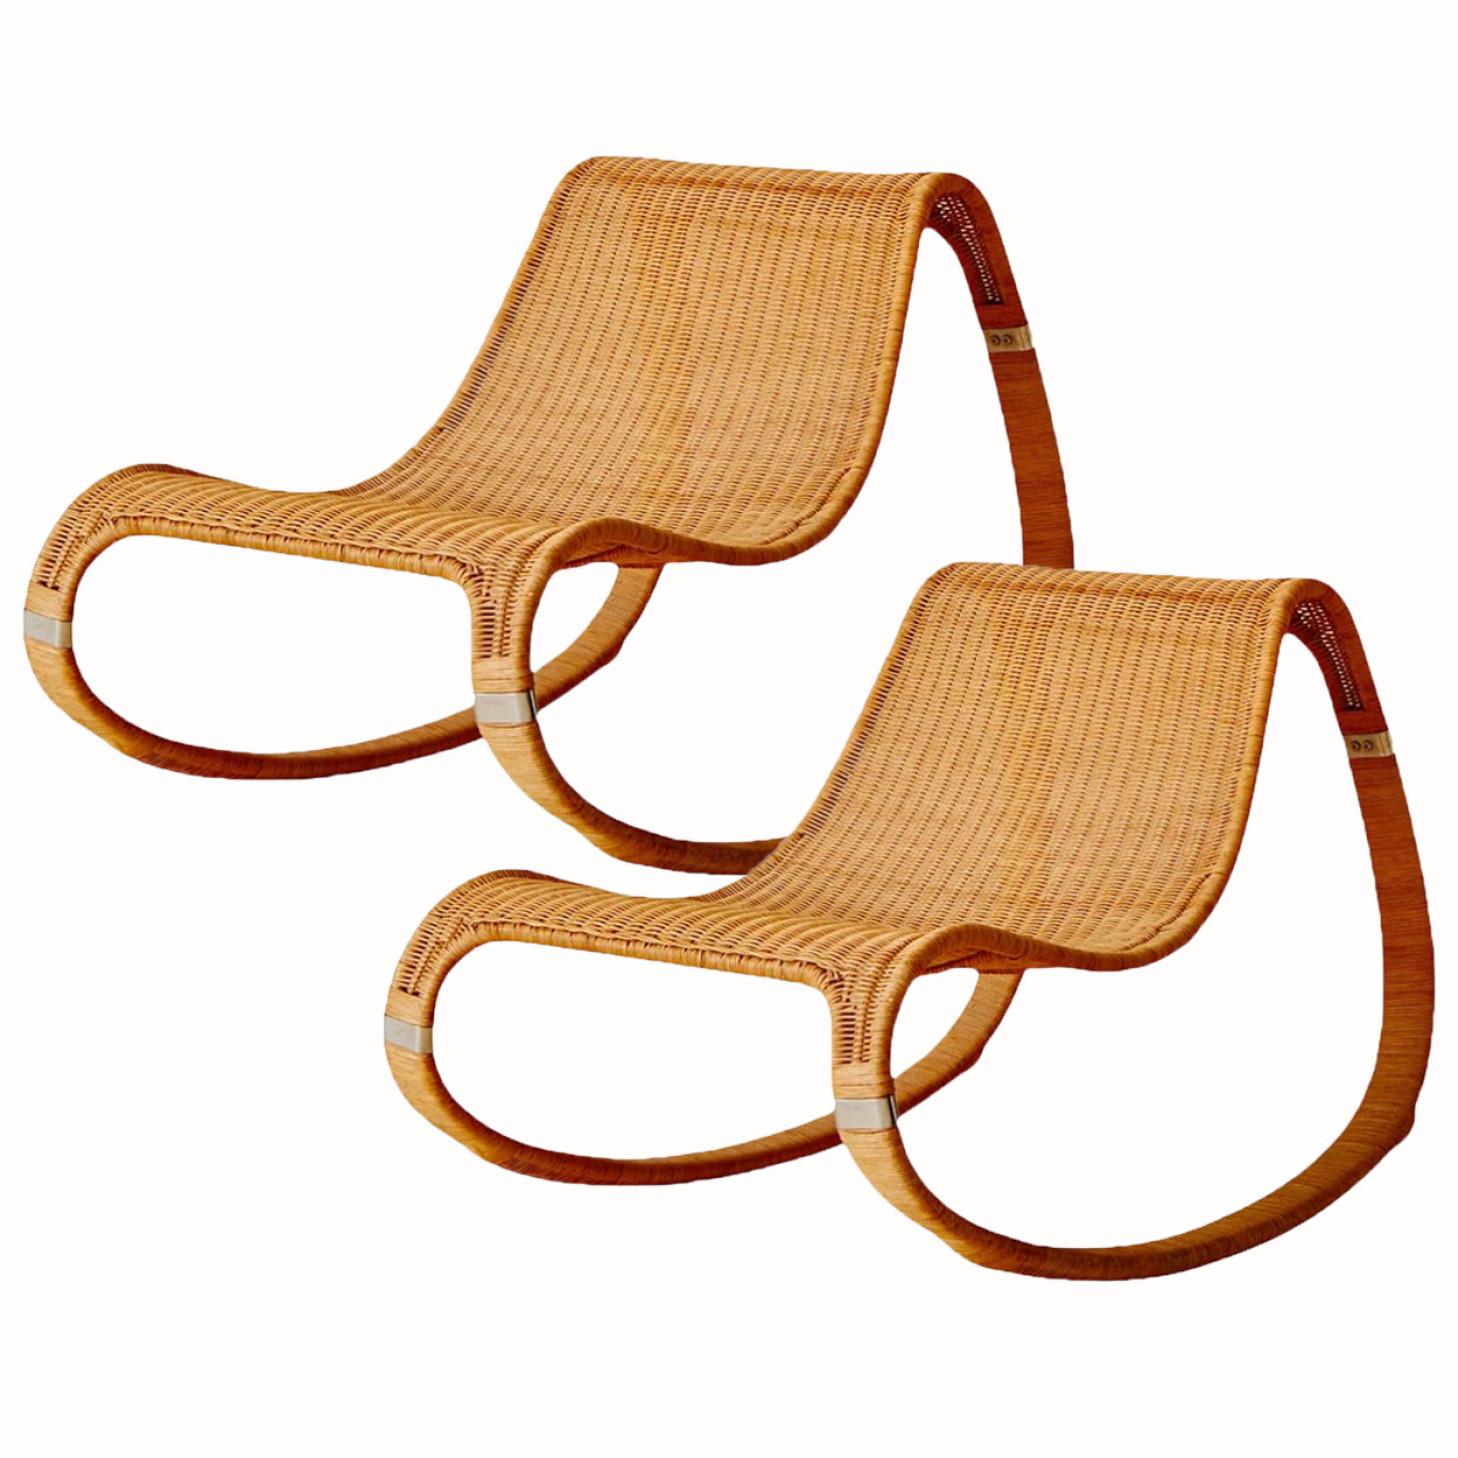 This beautiful hand-woven rattan rocking chair was designed by James Irvine (1958-2013) for Ikea in 2002. The beautiful organic curved lines with the chrome accents make this chair a stylish modern Classic. Brand sticker Ikea present.

In very good